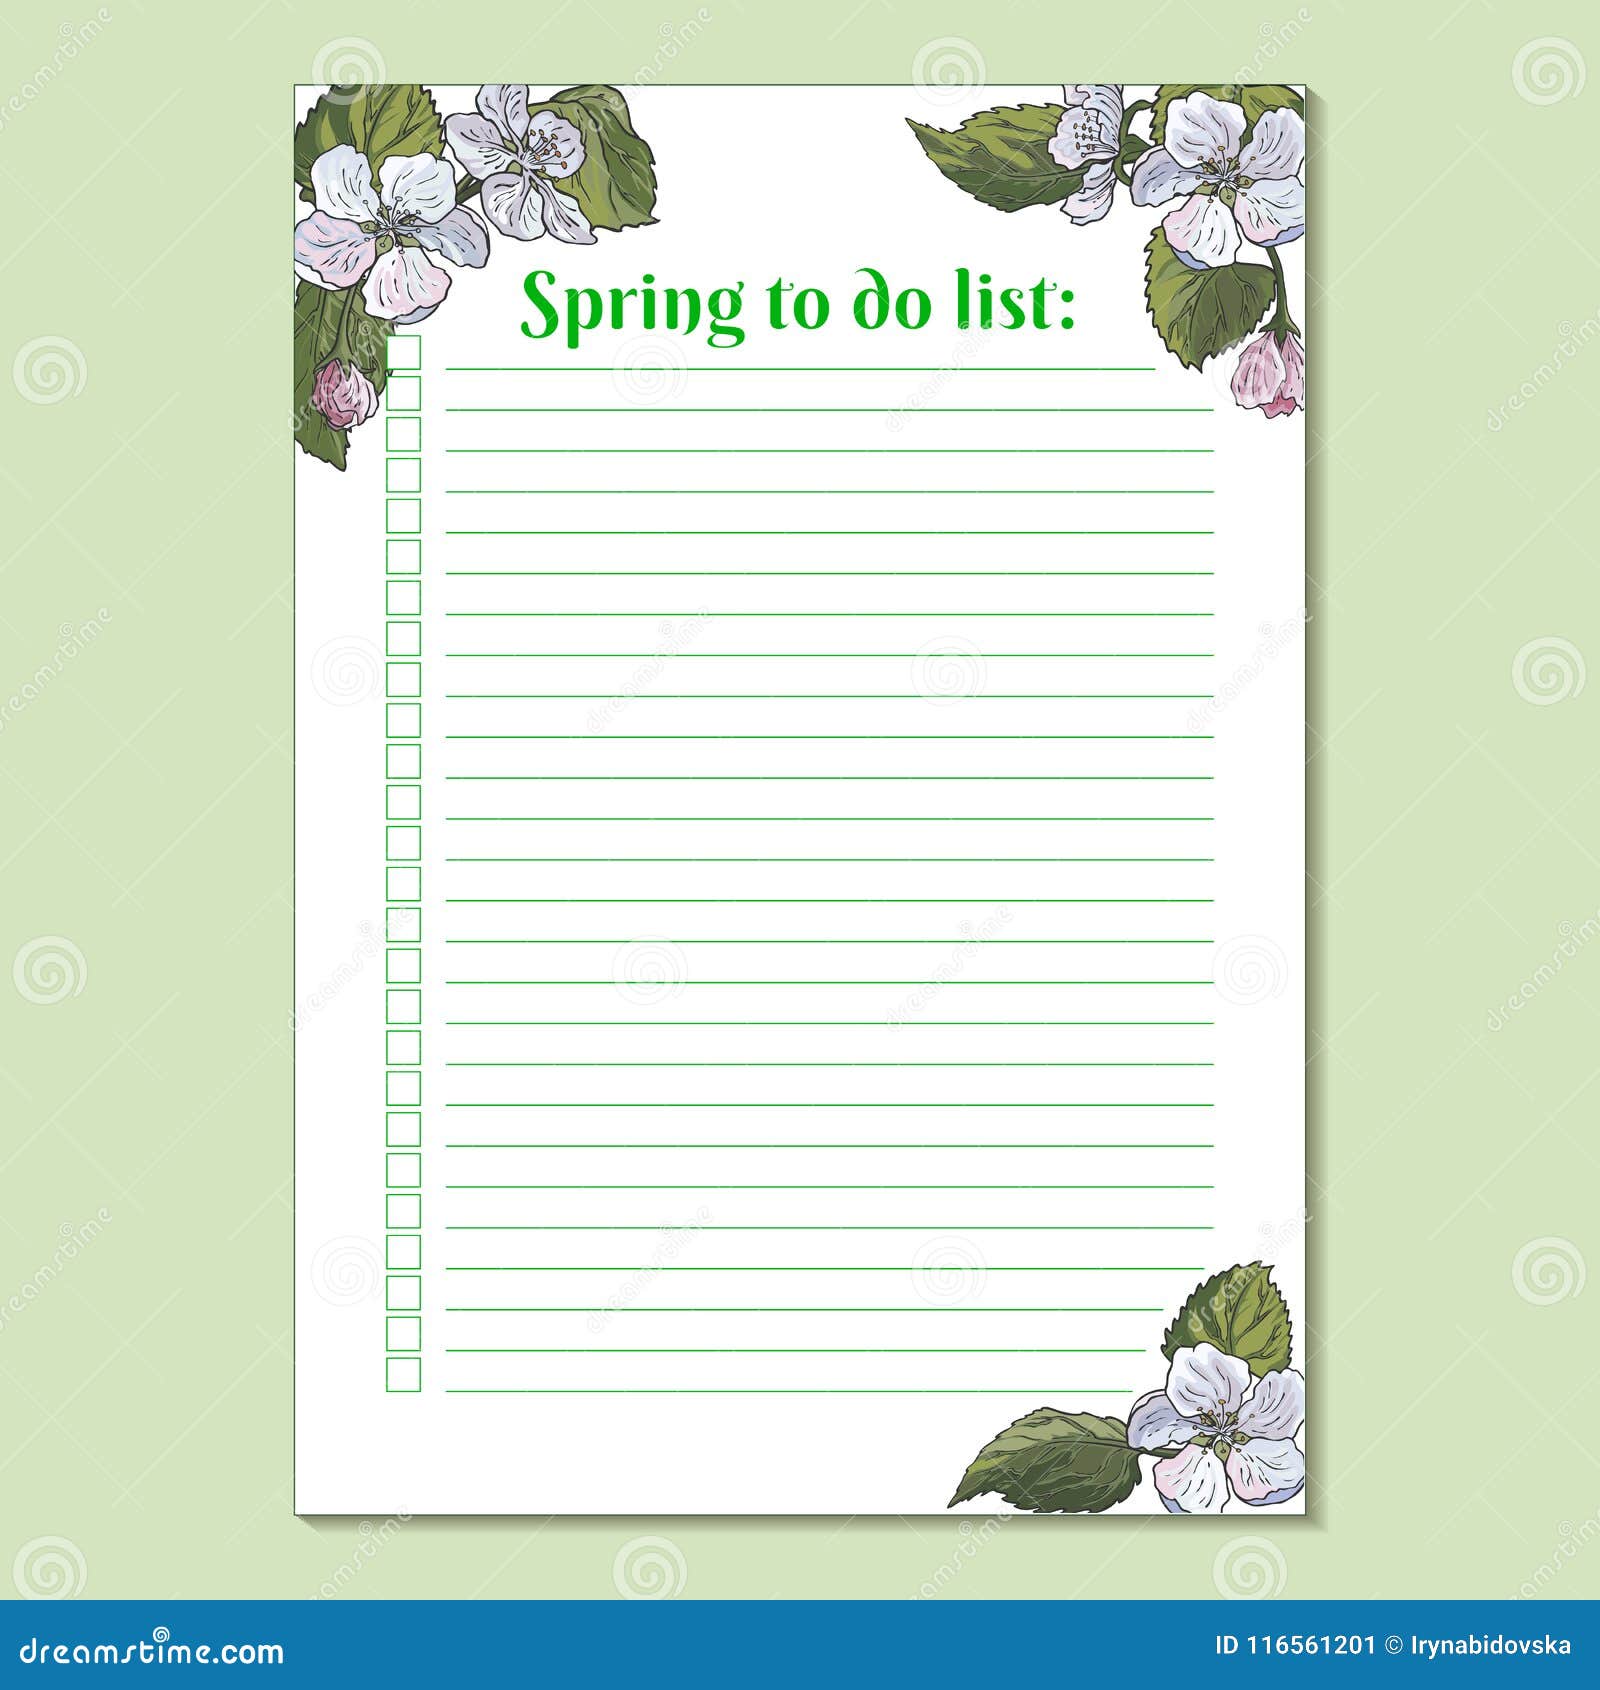 Cool To Do List Template from thumbs.dreamstime.com